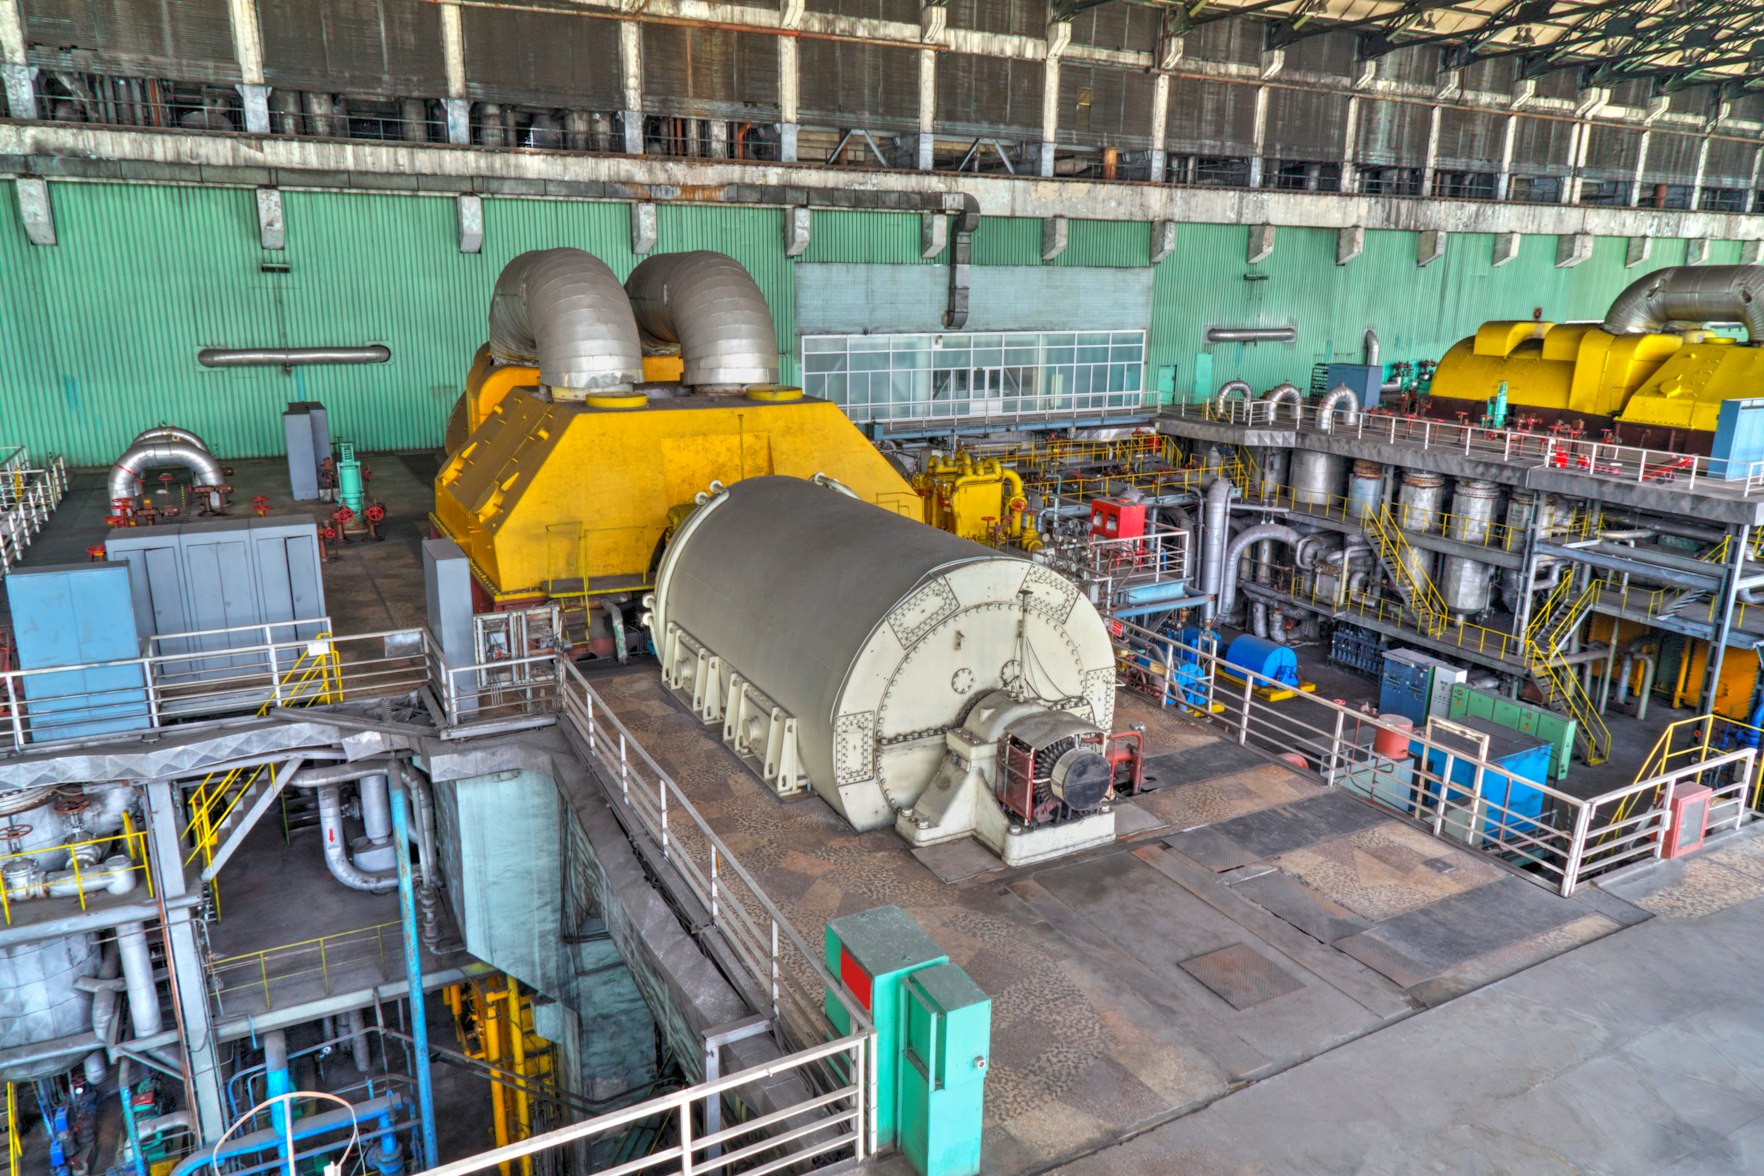 Machine room in thermal power plant with electric generators and turbines